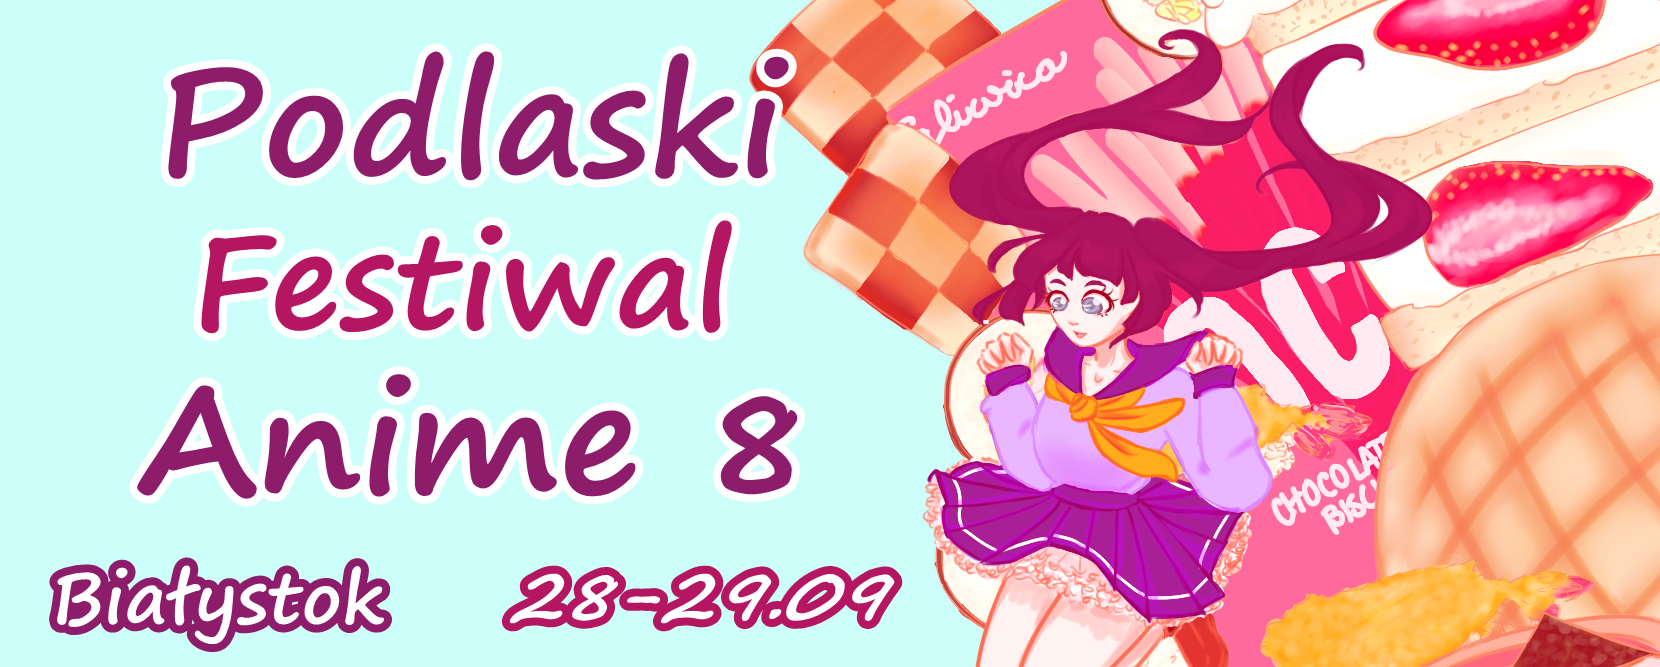 You are currently viewing Podlaski Festiwal Anime 2019